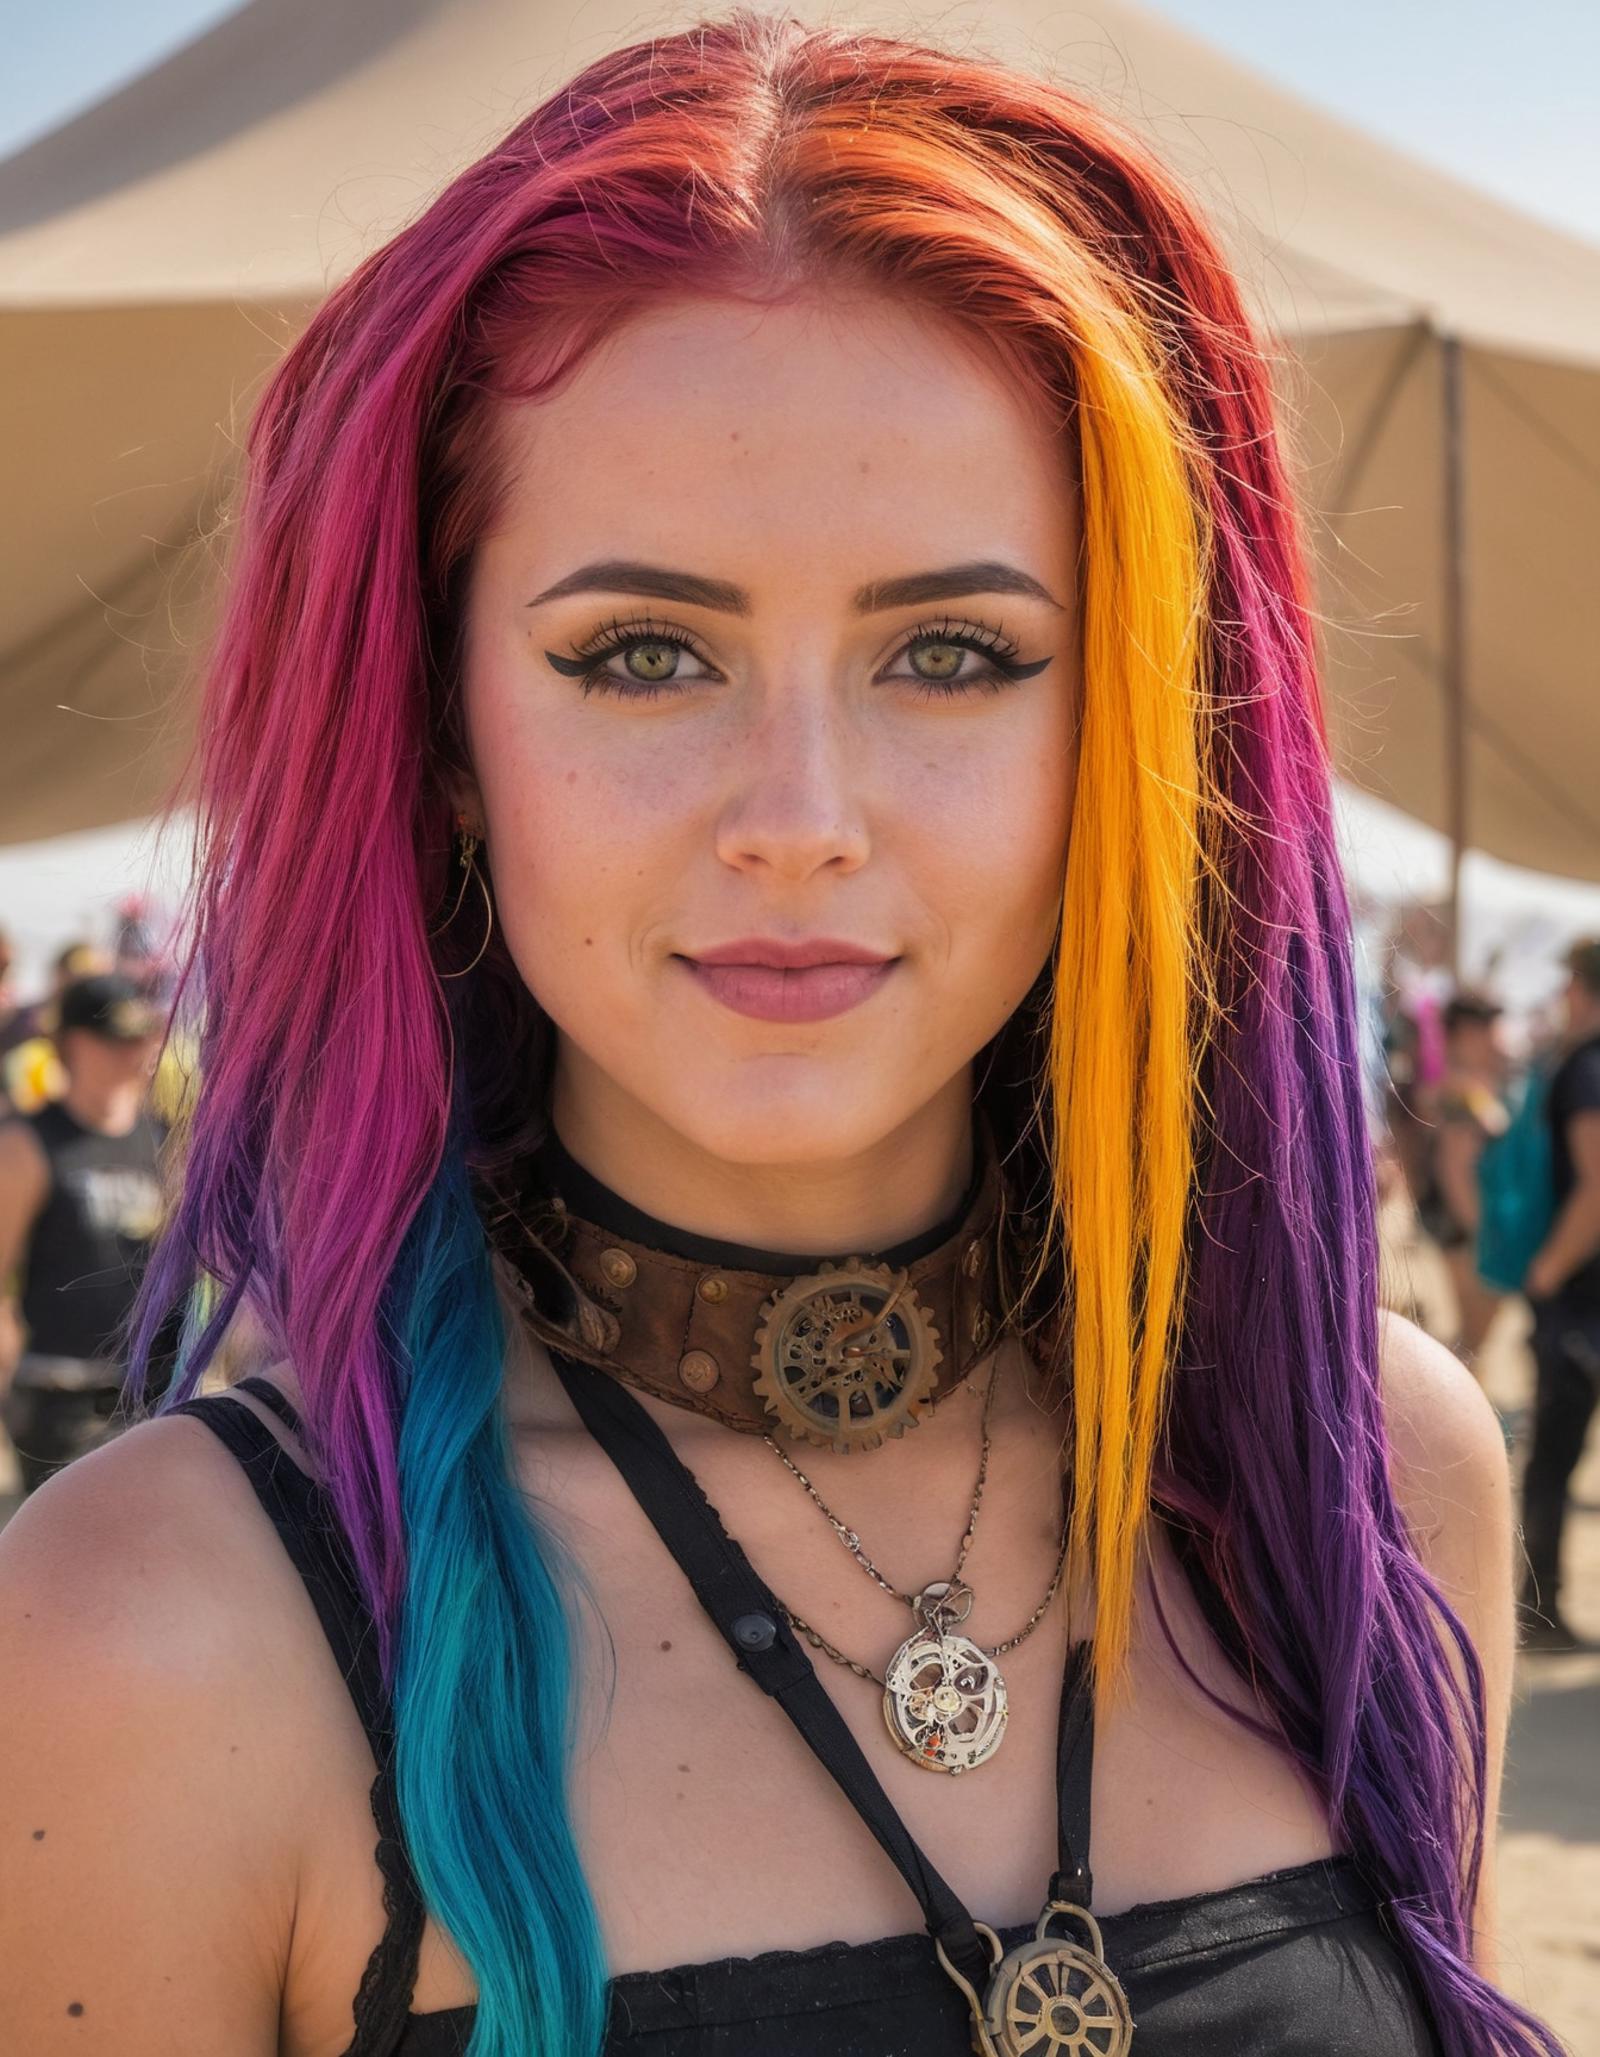 A woman with a colorful hairstyle wearing a black shirt and a necklace.